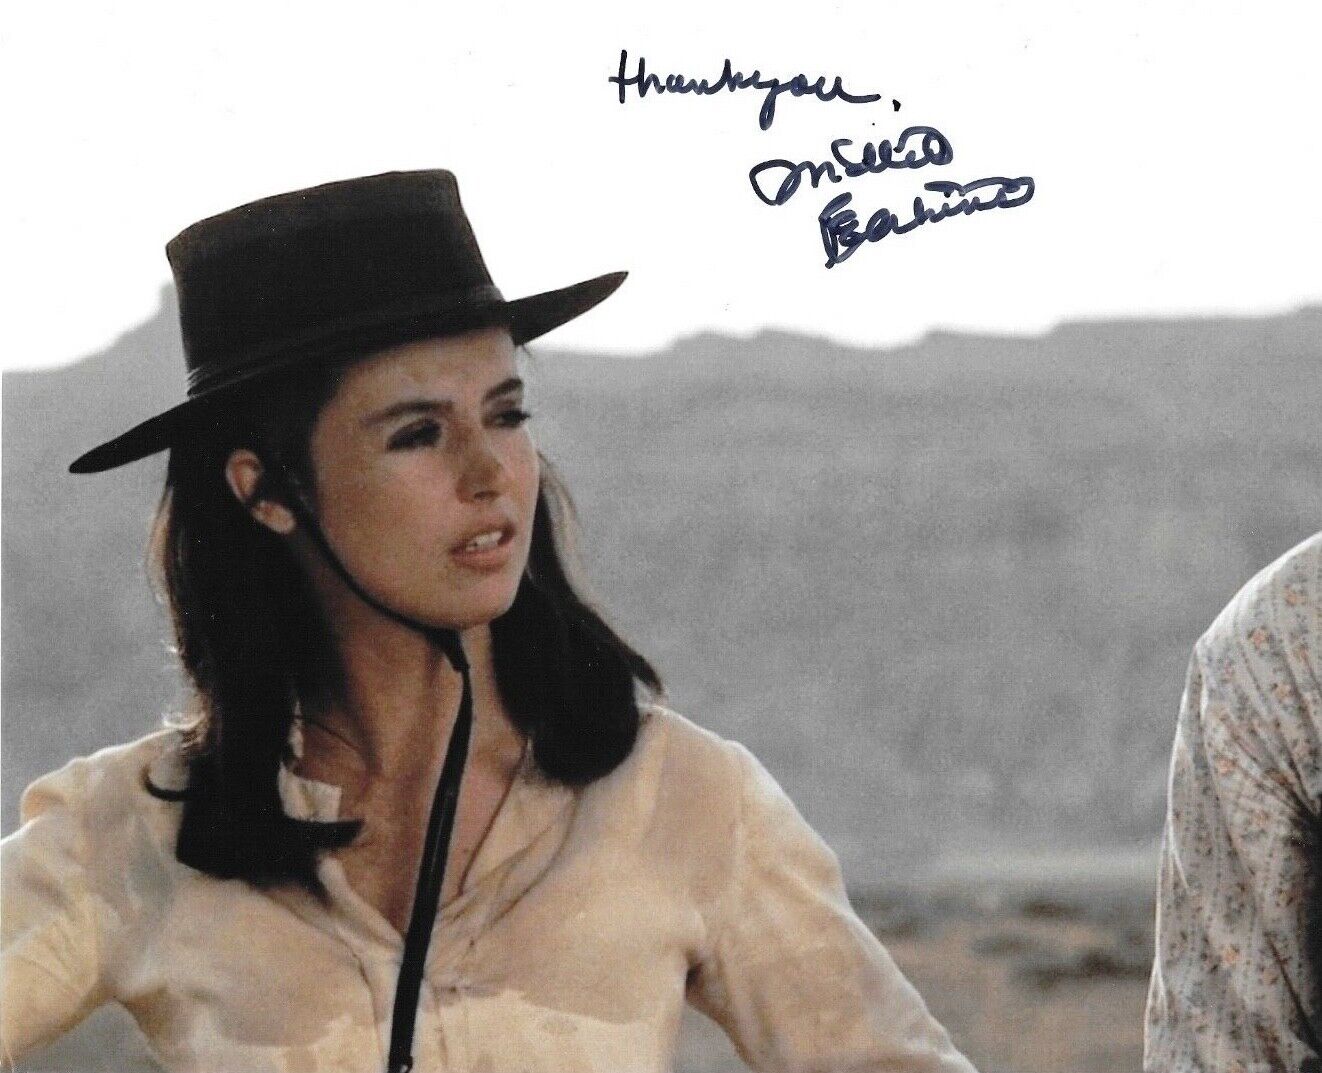 * MILLIE PERKINS * signed 8x10 Photo Poster painting * THE SHOOTING * COA * 2